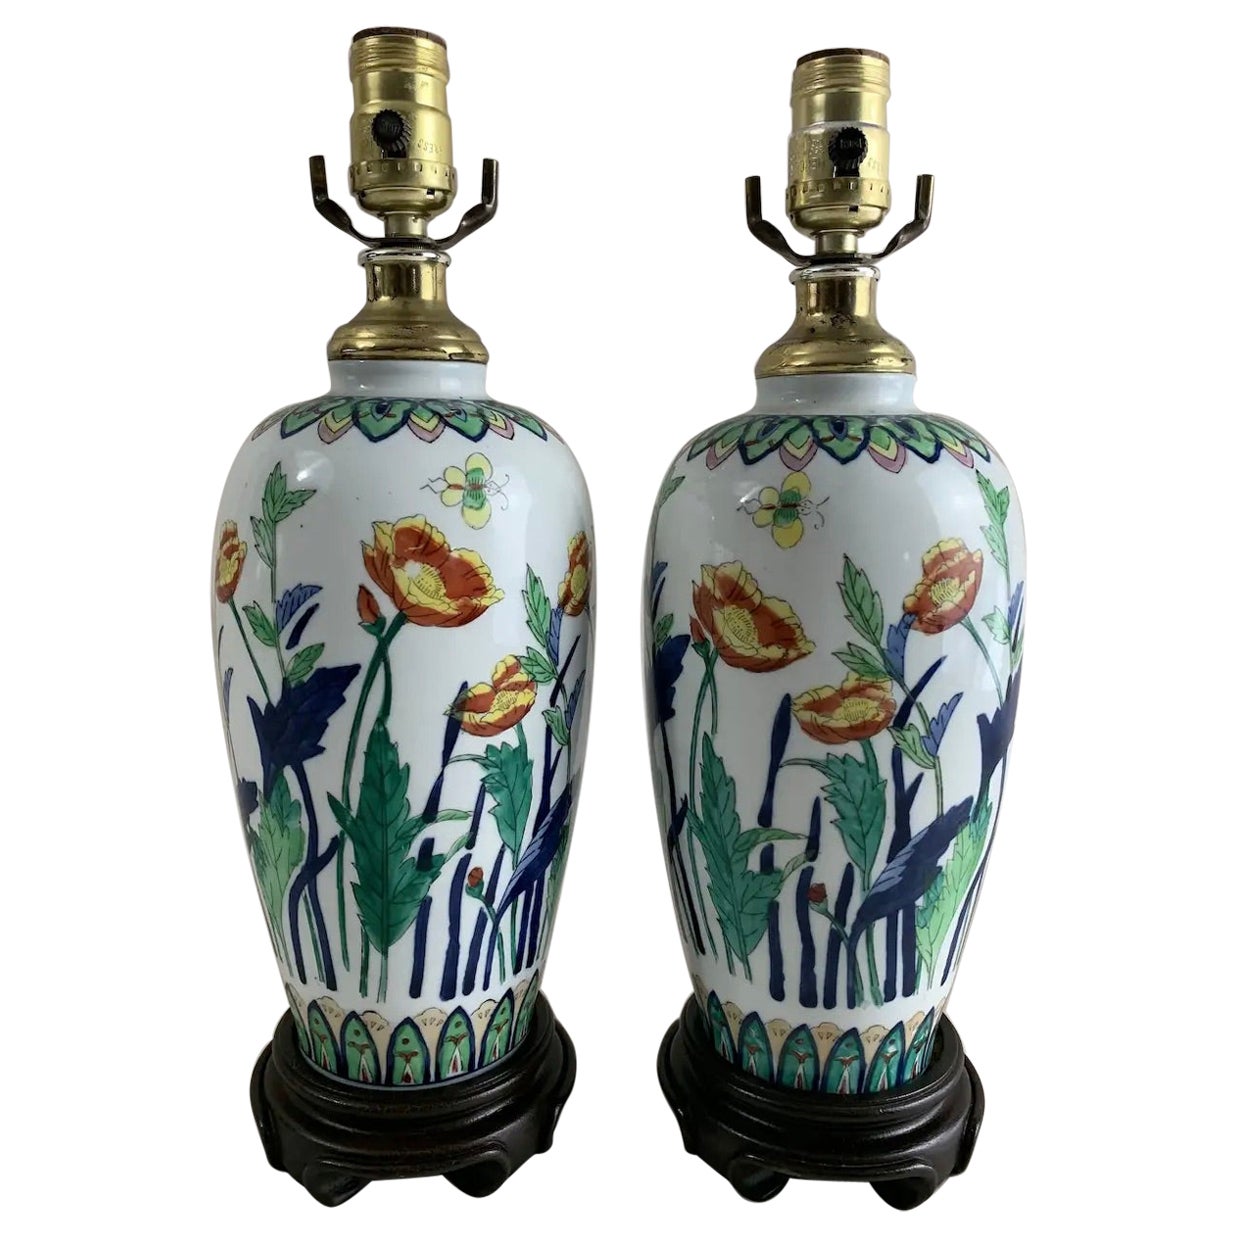 A Pair of Early 20th Century Thai Porcelain Table Lamps